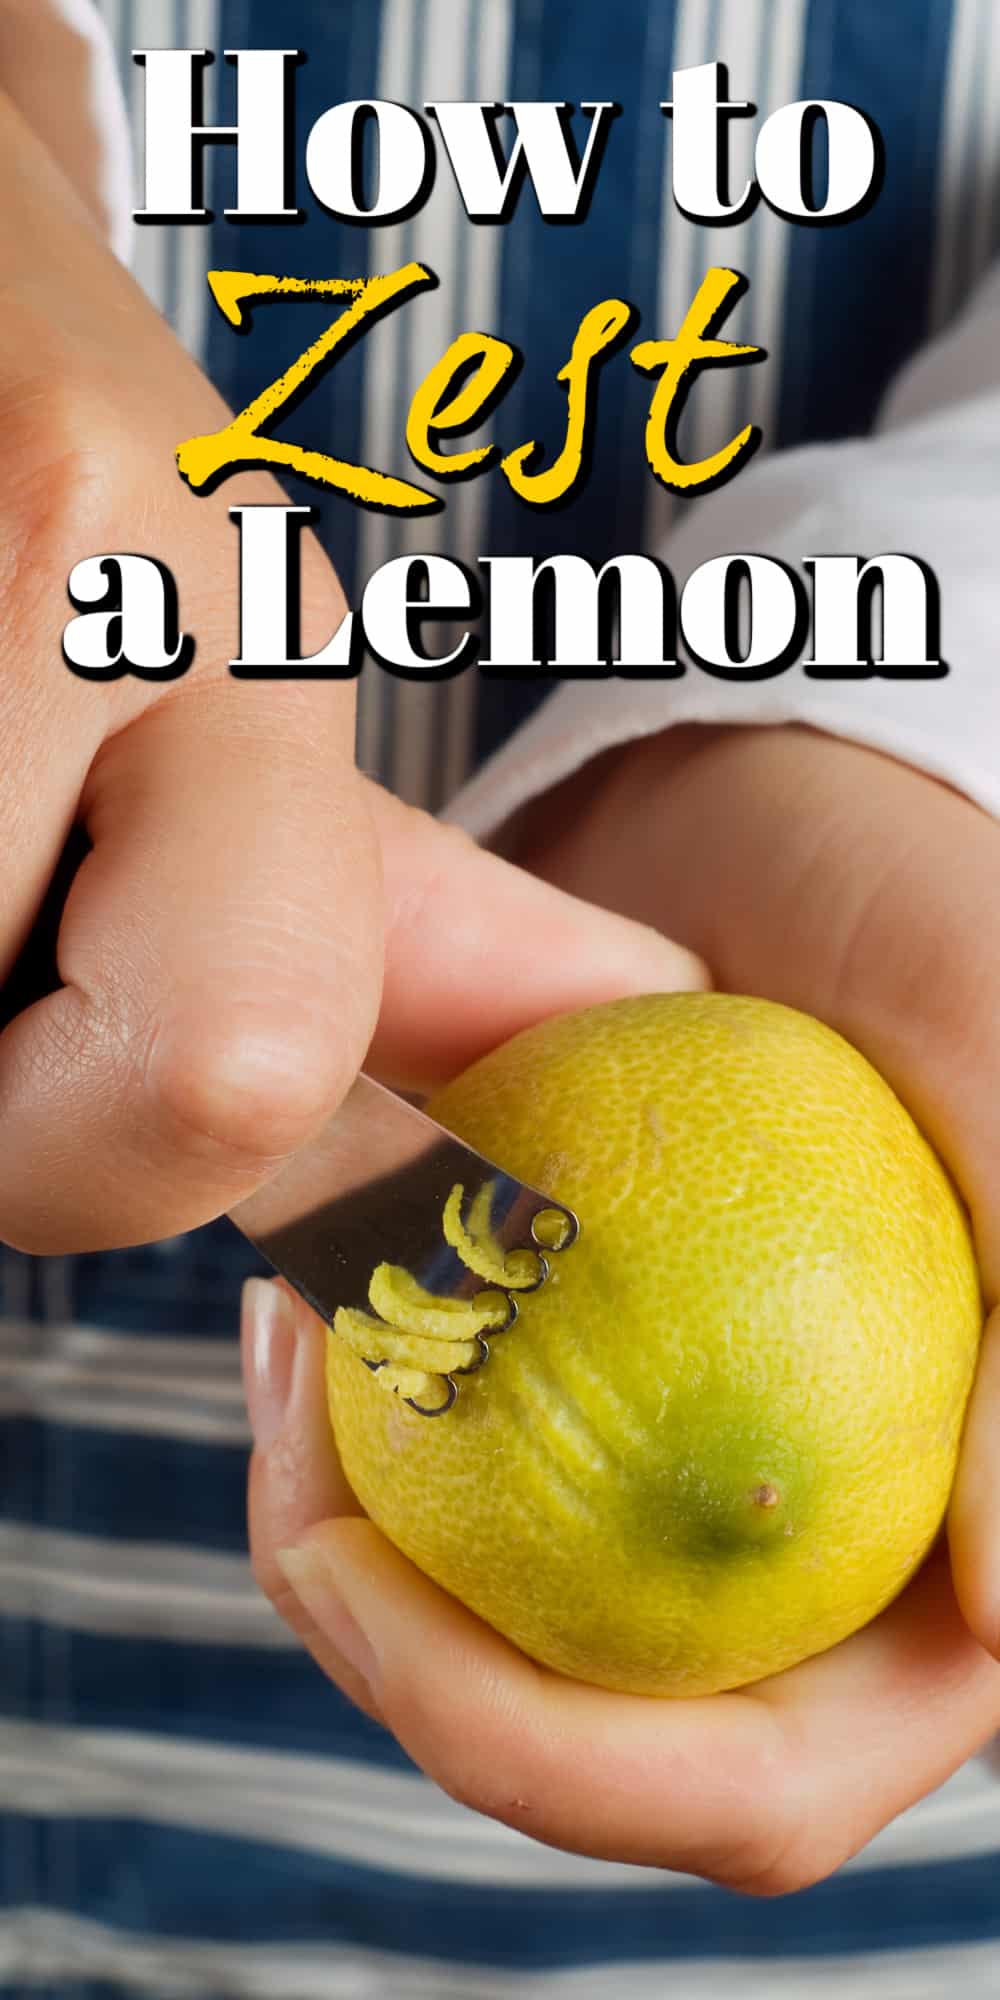 How to Zest a Lemon Pin.